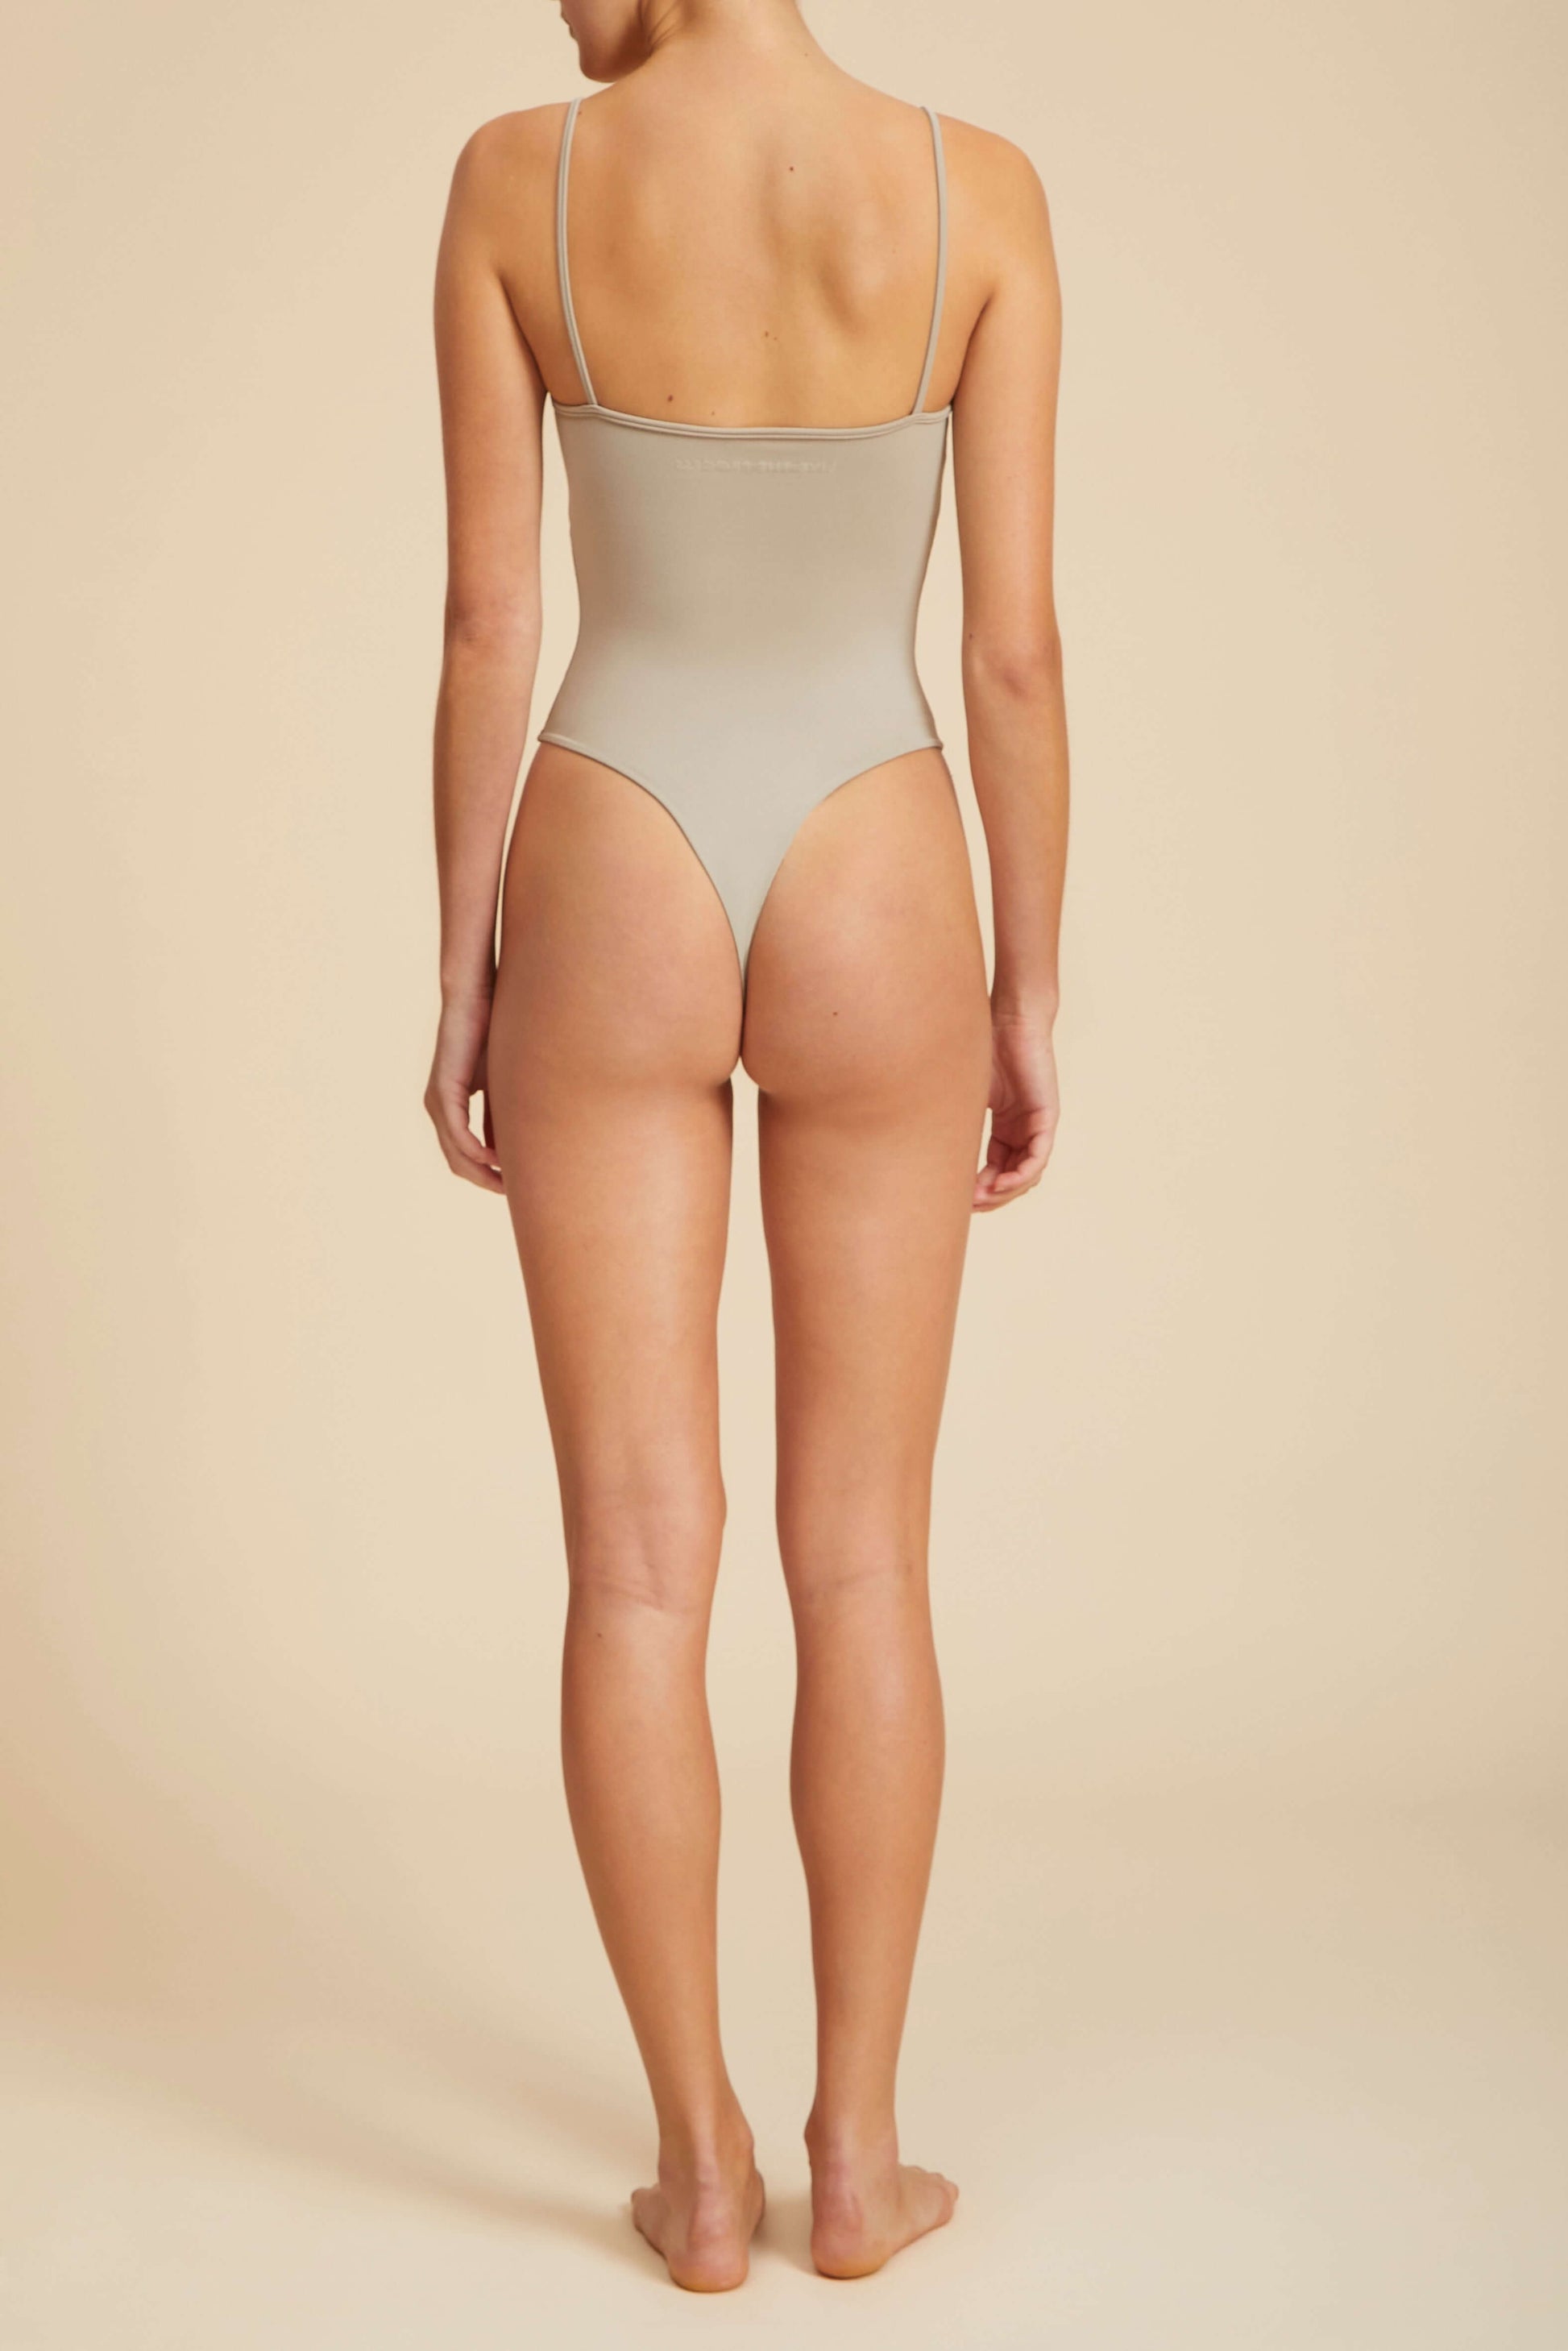 Live The Process Vega Leotard. Layer cake. Easy does it is the name of the game for our Vega Leotard. The essential featuring ruching at the bust and a thong bottom is just the thing to layer up and go.